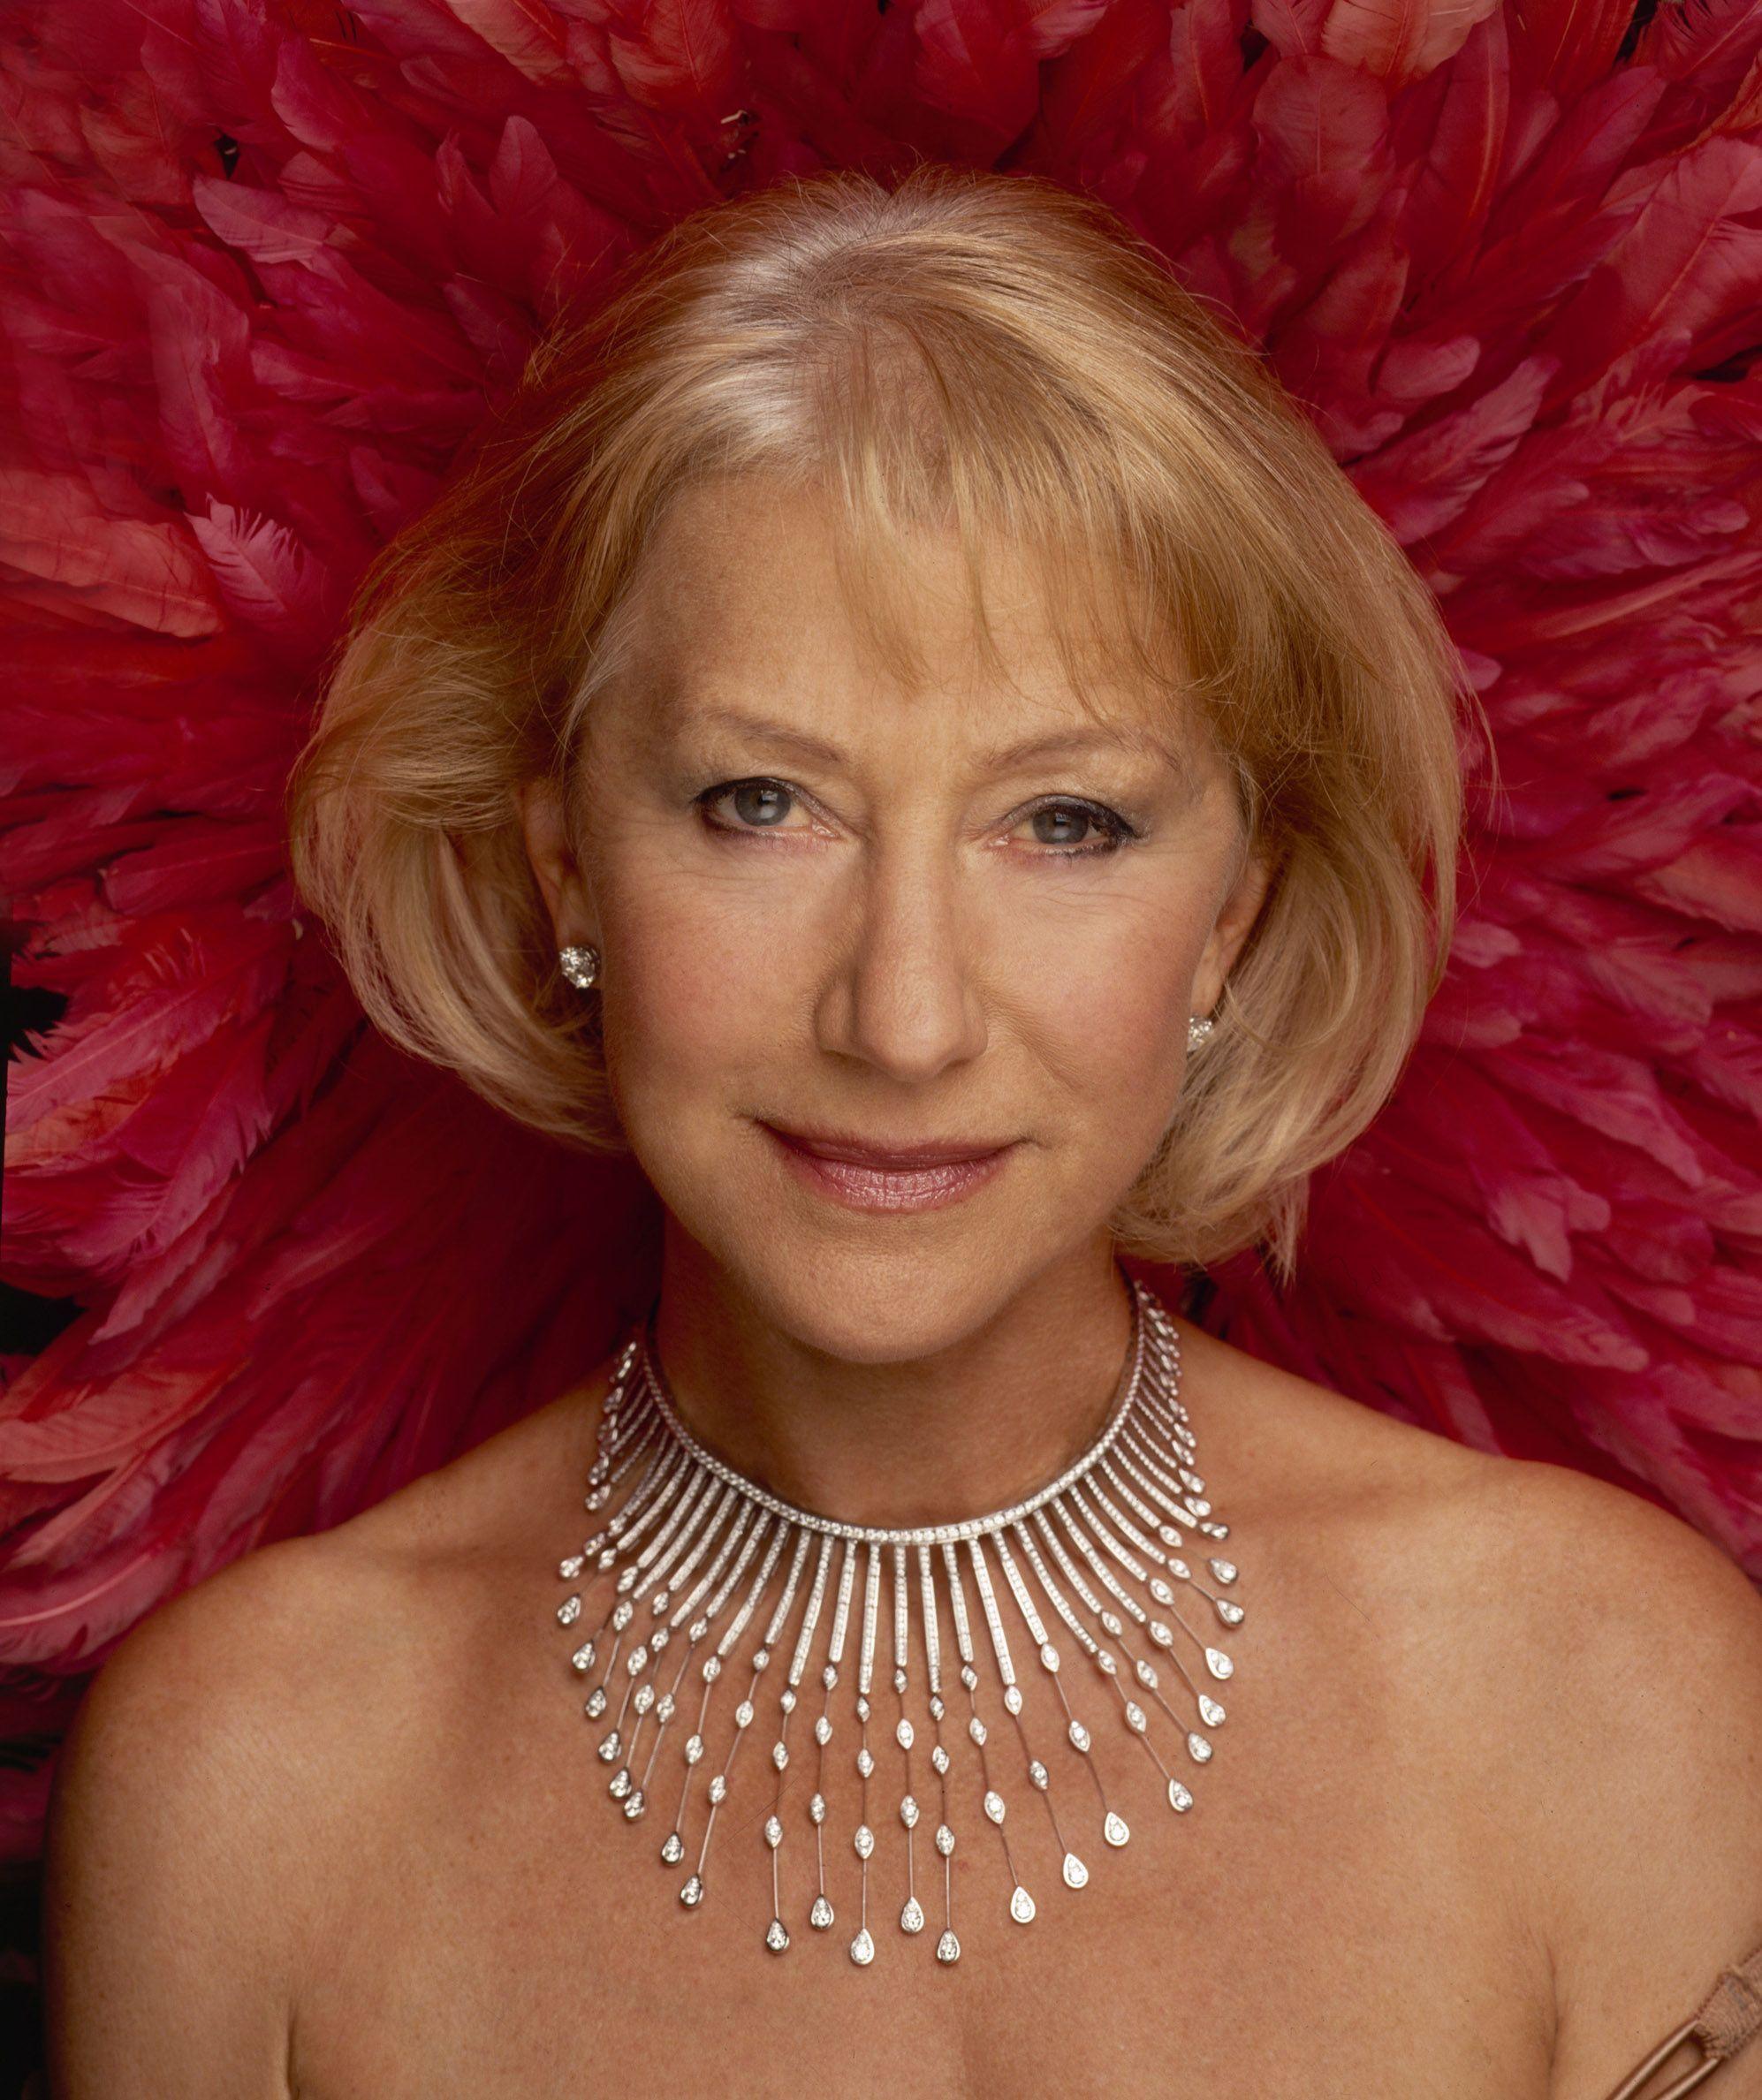 Helen Mirren for showing that you can be elegant and beautiful at